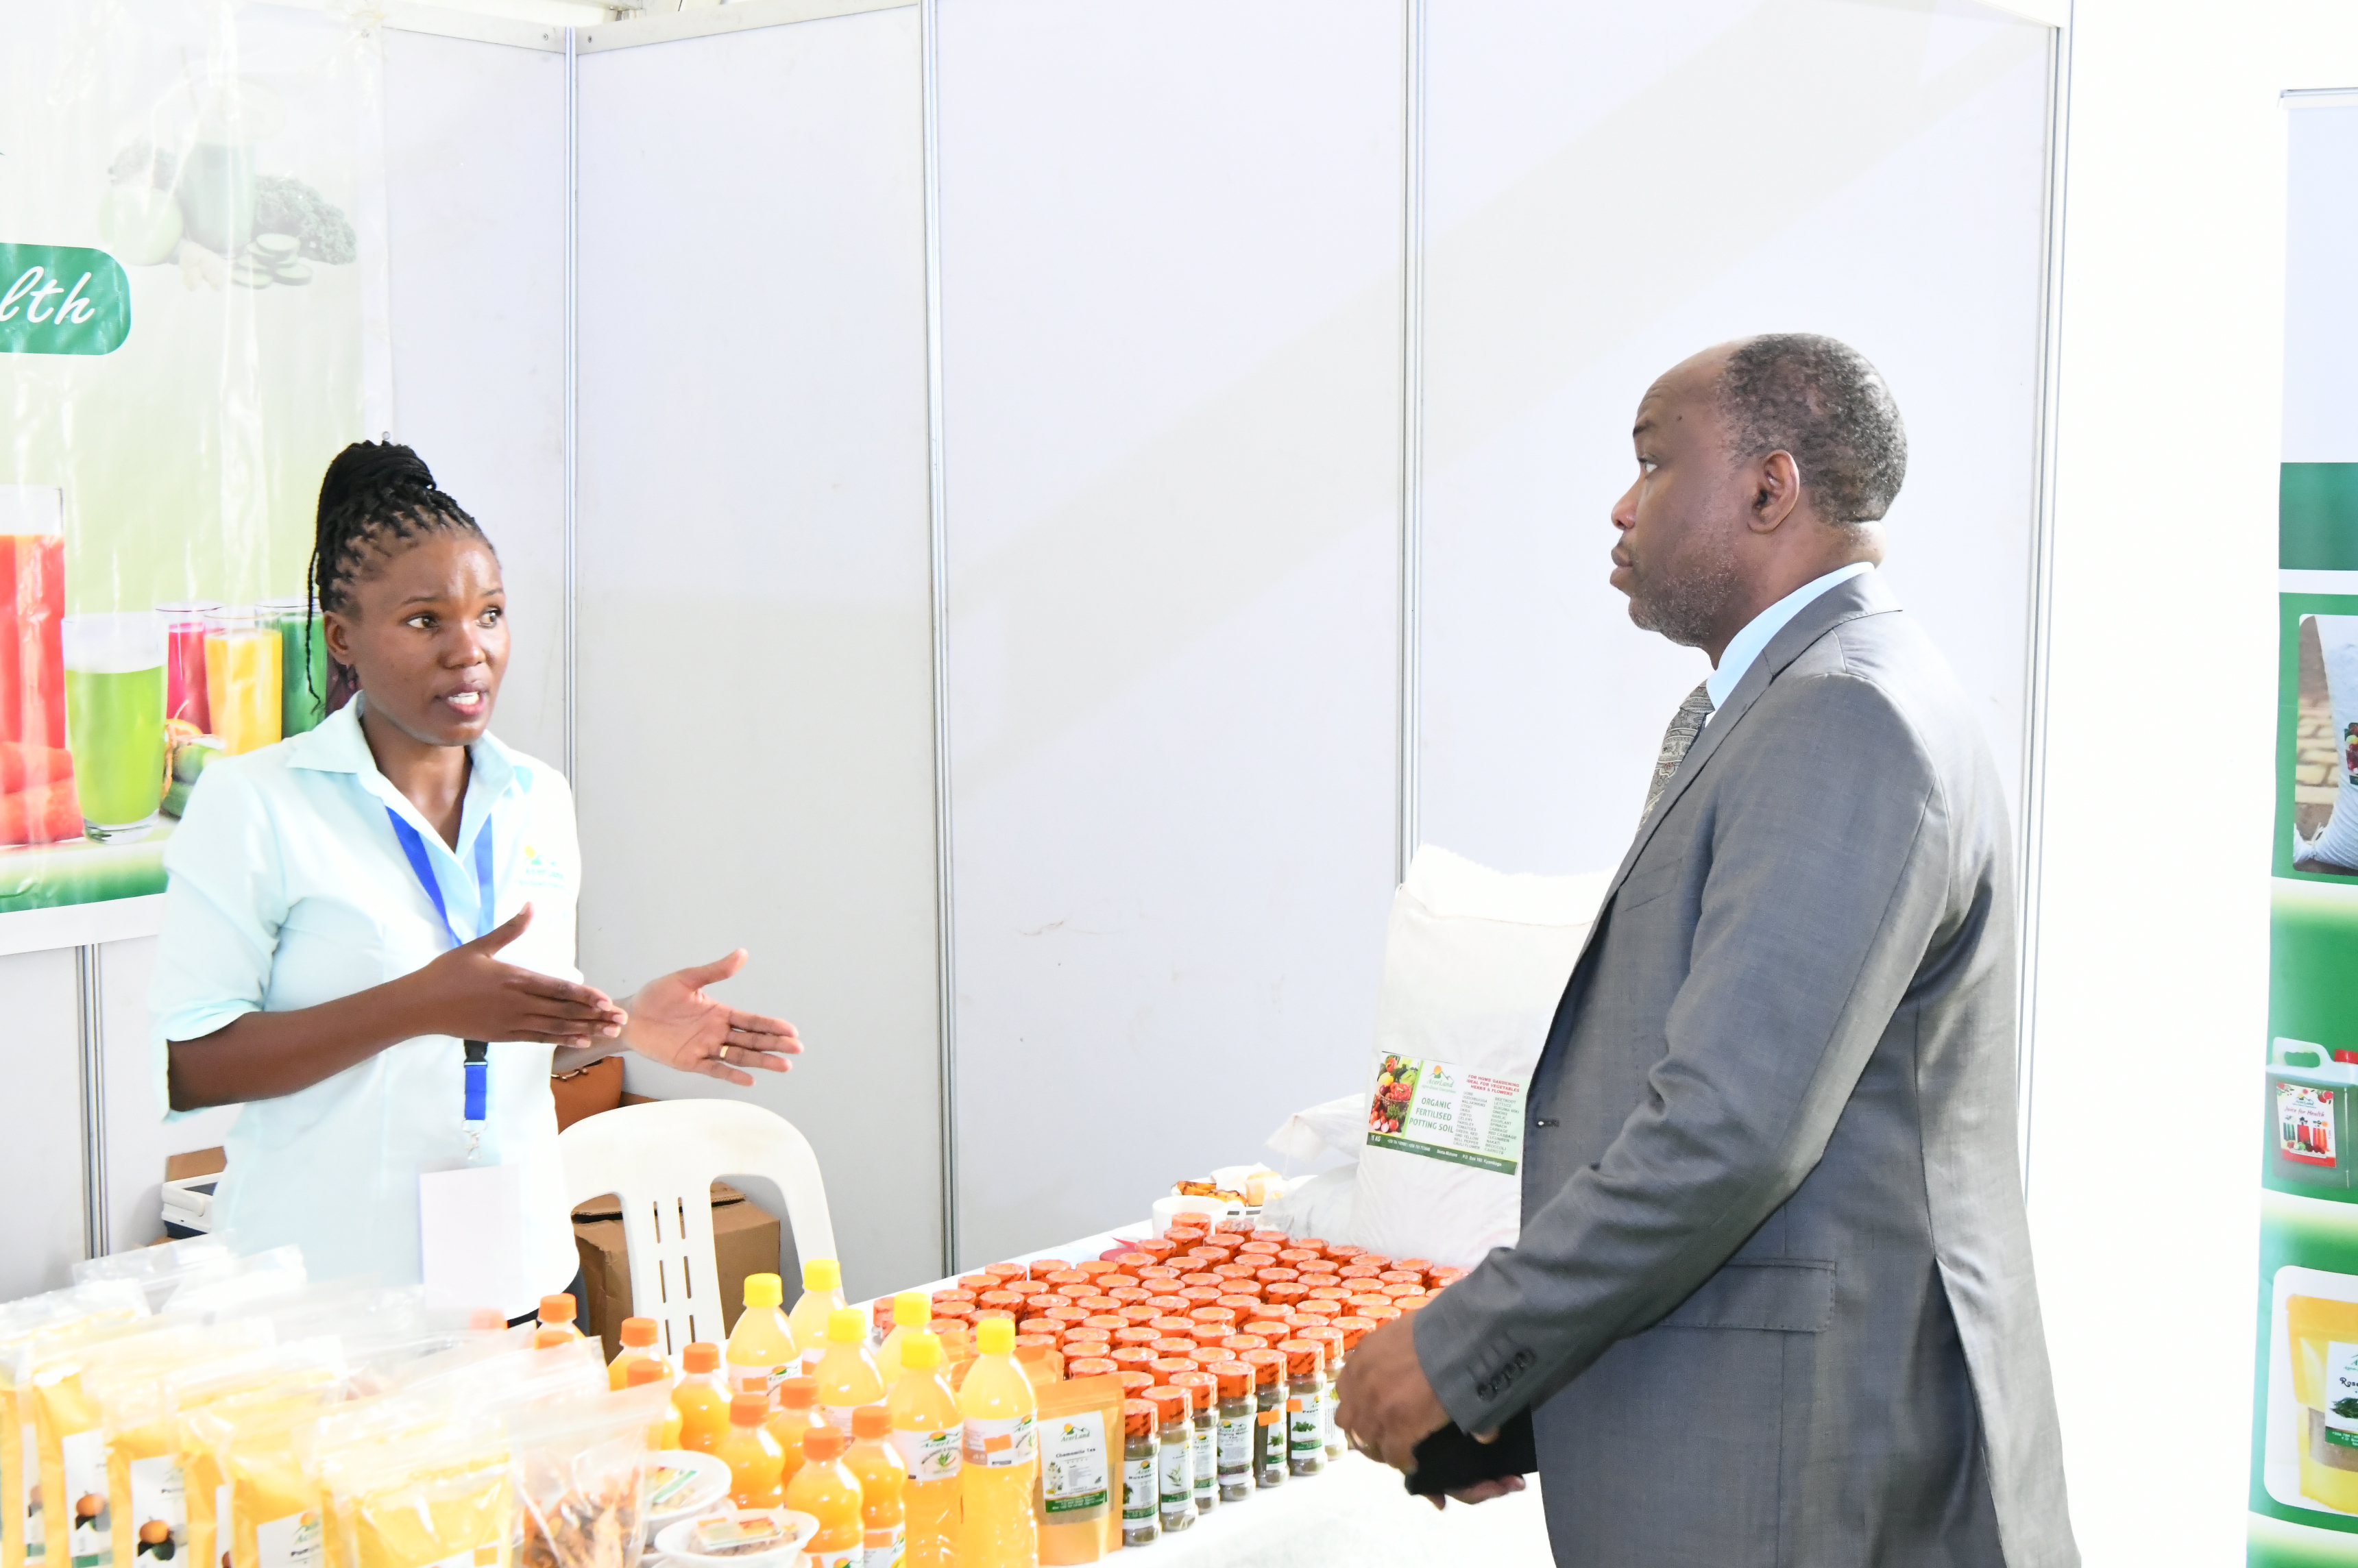 Maxime (Right) listening to one of the fruit exhibitors at the event in Sheraton Hotel-Kigo, Kampala.